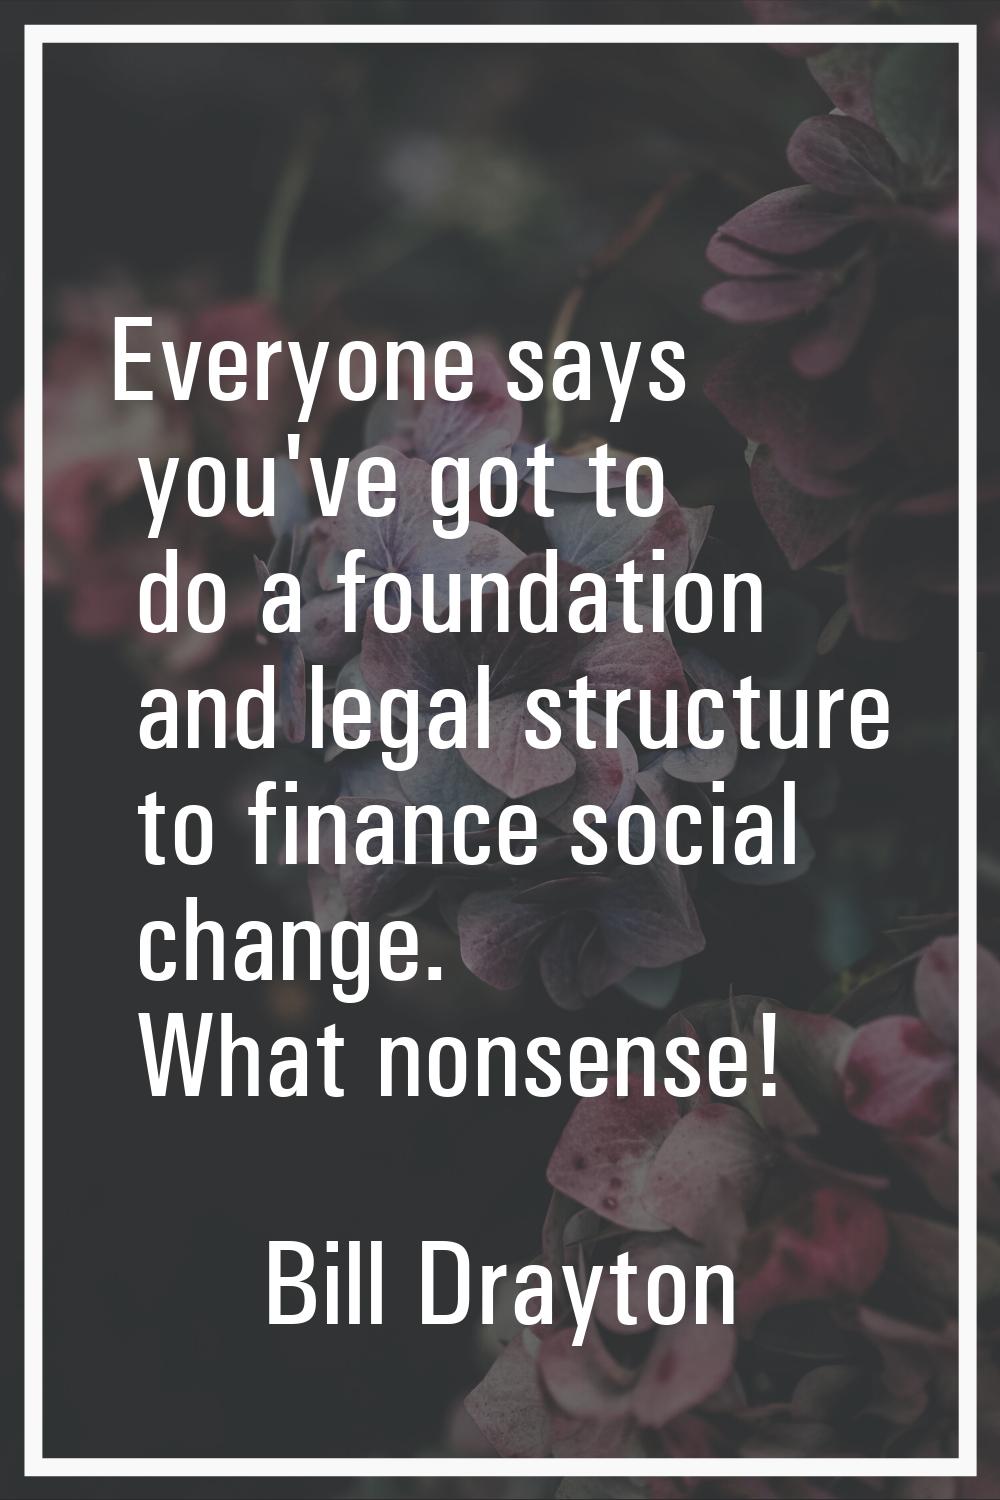 Everyone says you've got to do a foundation and legal structure to finance social change. What nons